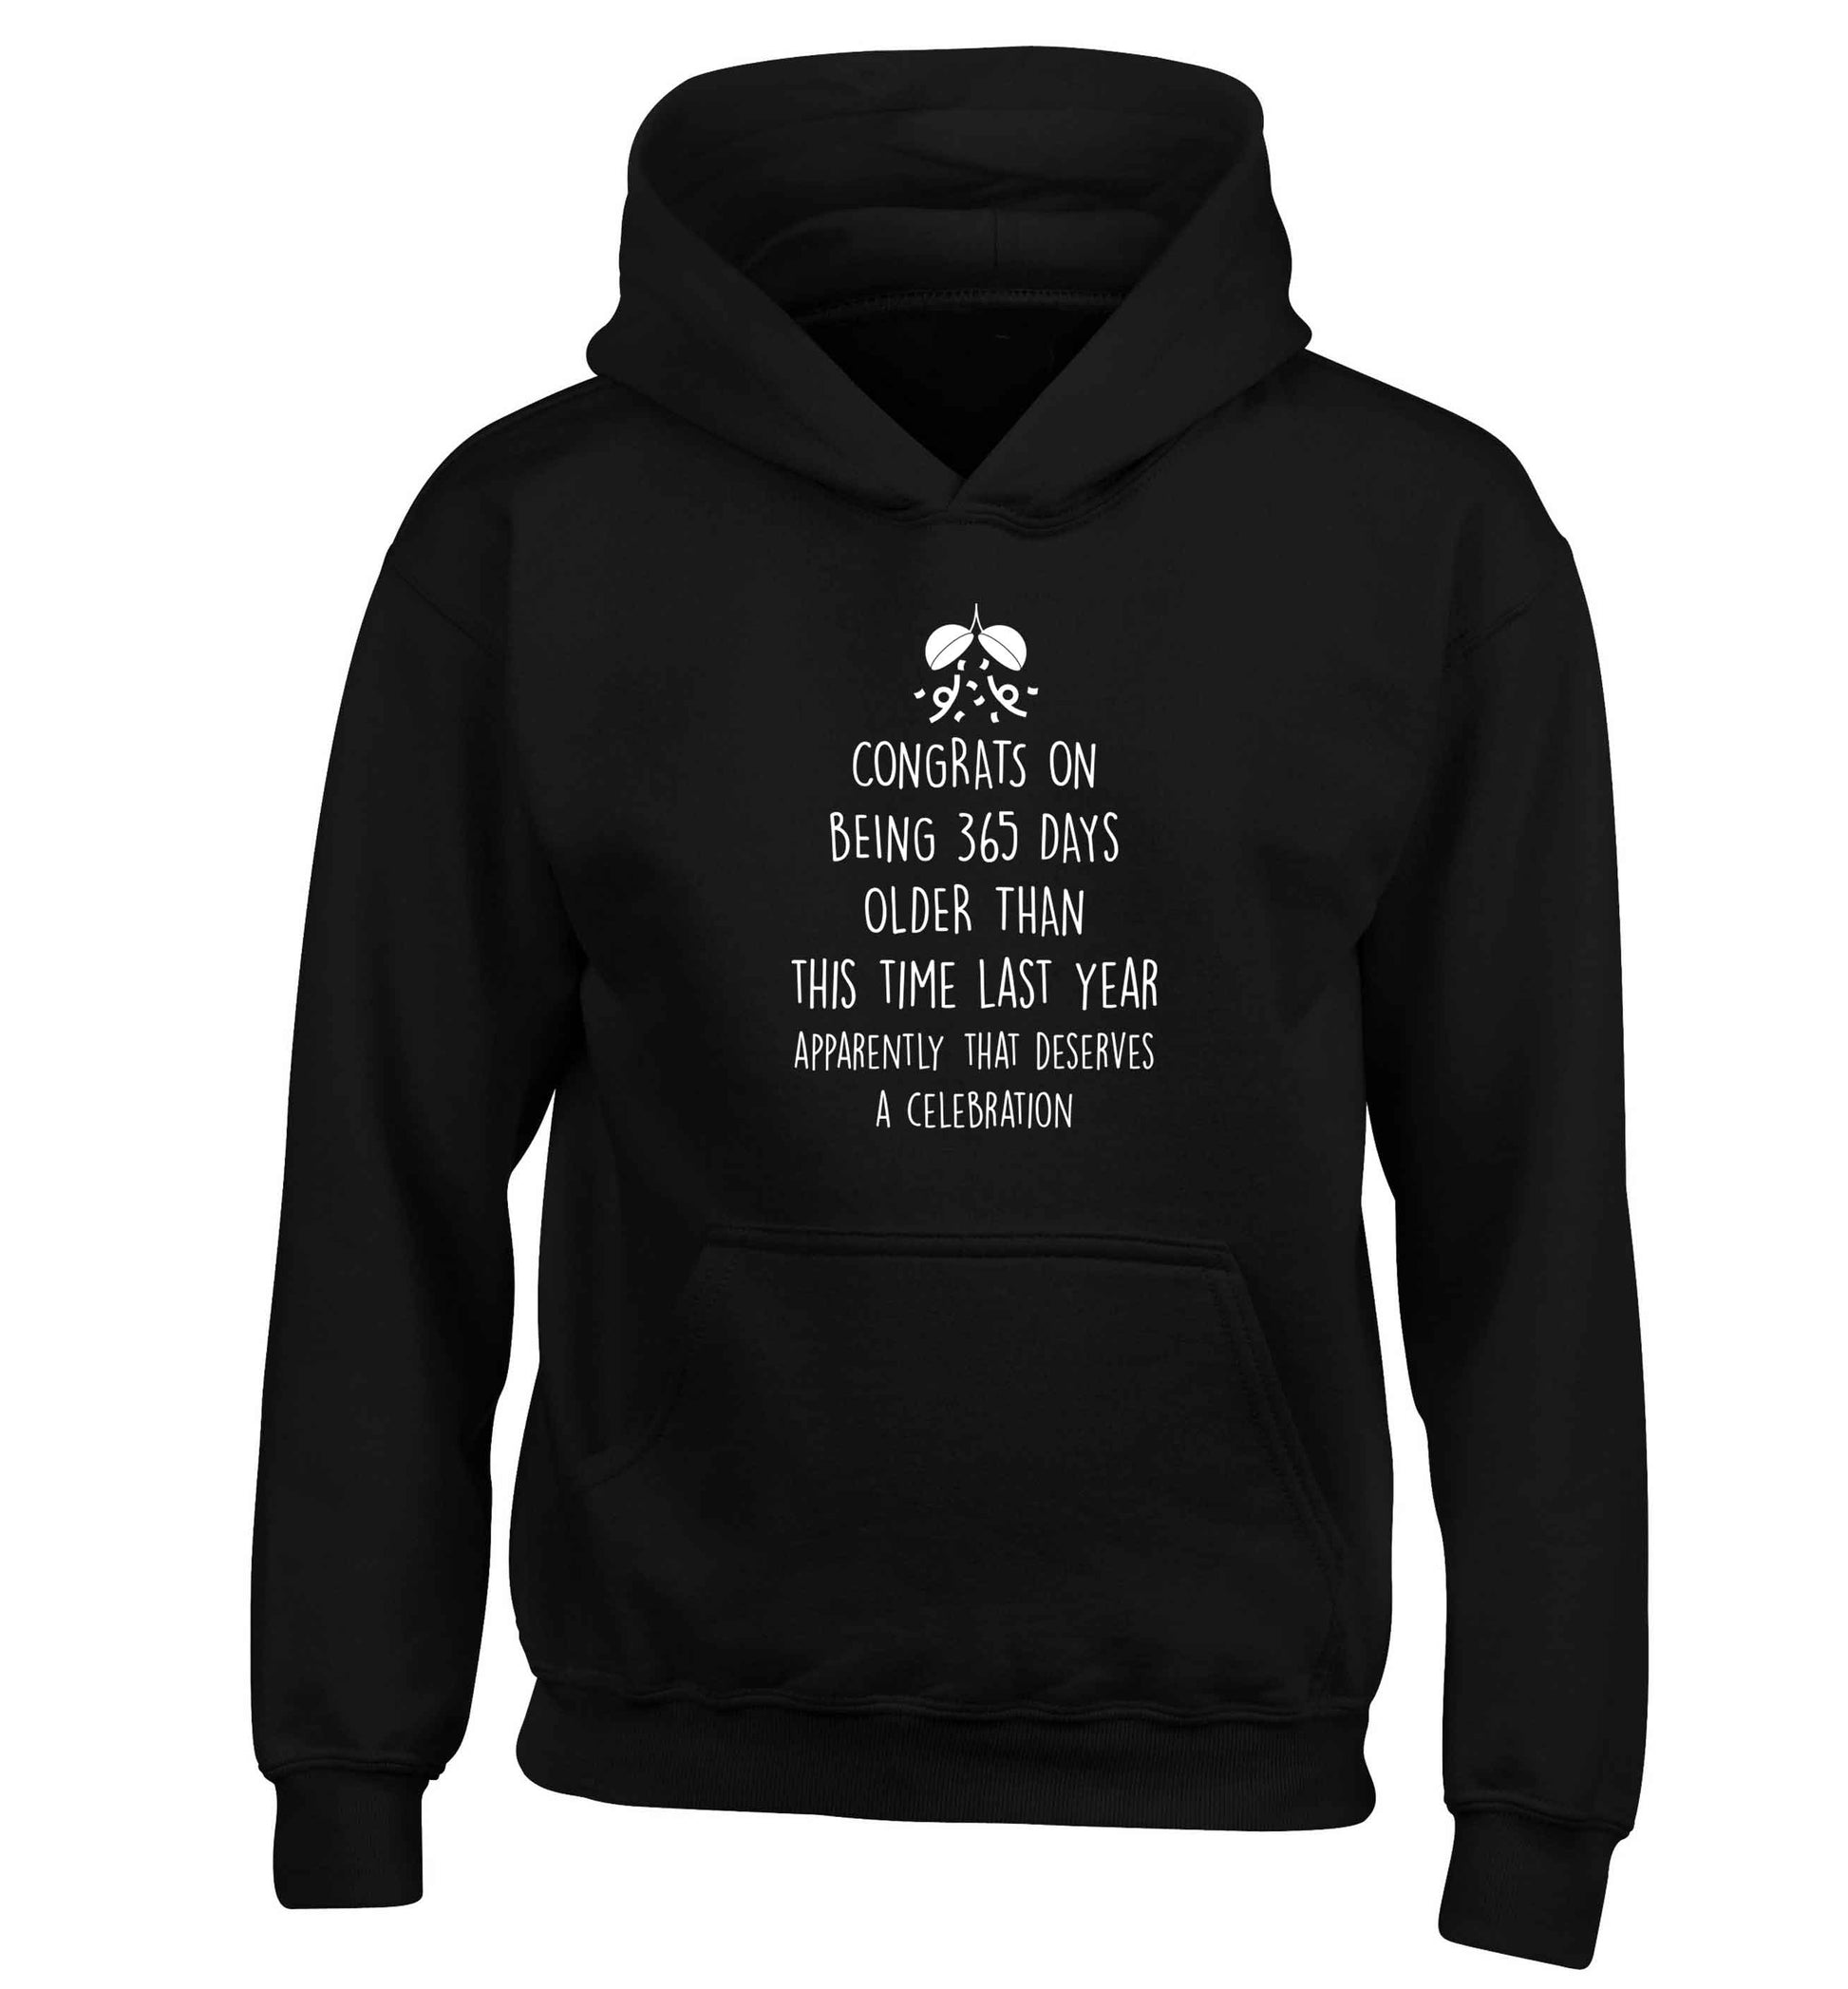 Congrats on being 365 days older than you were this time last year apparently that deserves a celebration children's black hoodie 12-13 Years